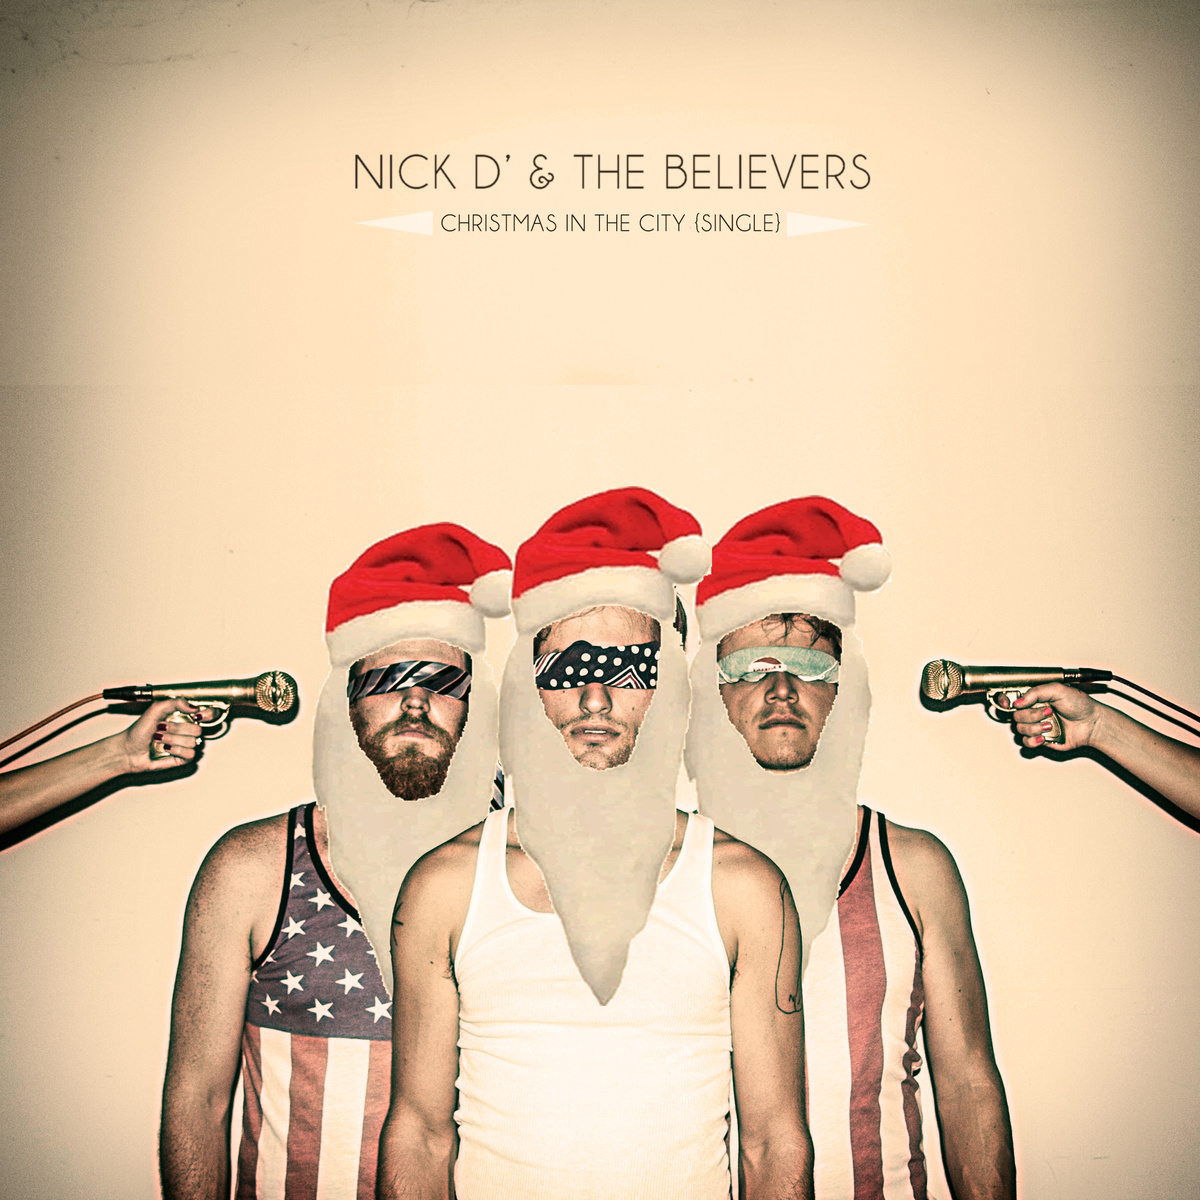 Nick D' and the Believers